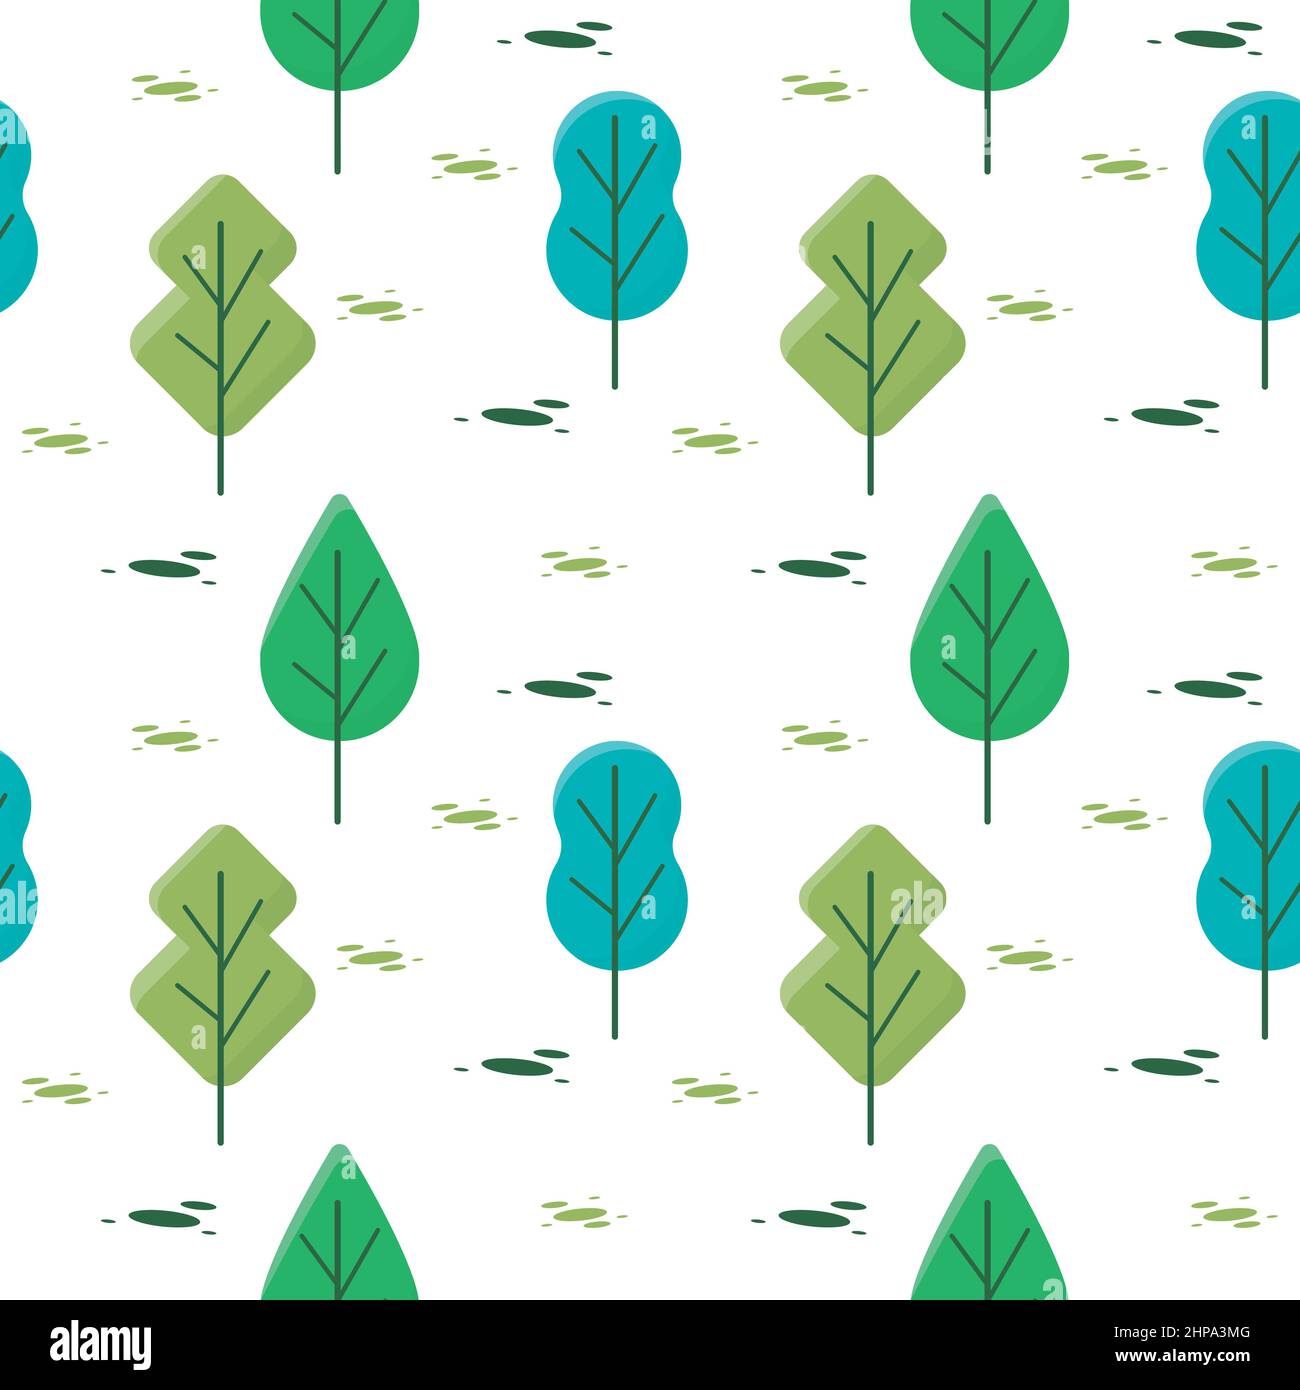 Seamless Pattern Repeatable Texture Summer Spring Tree Nature Paper Fabric Stock Vector